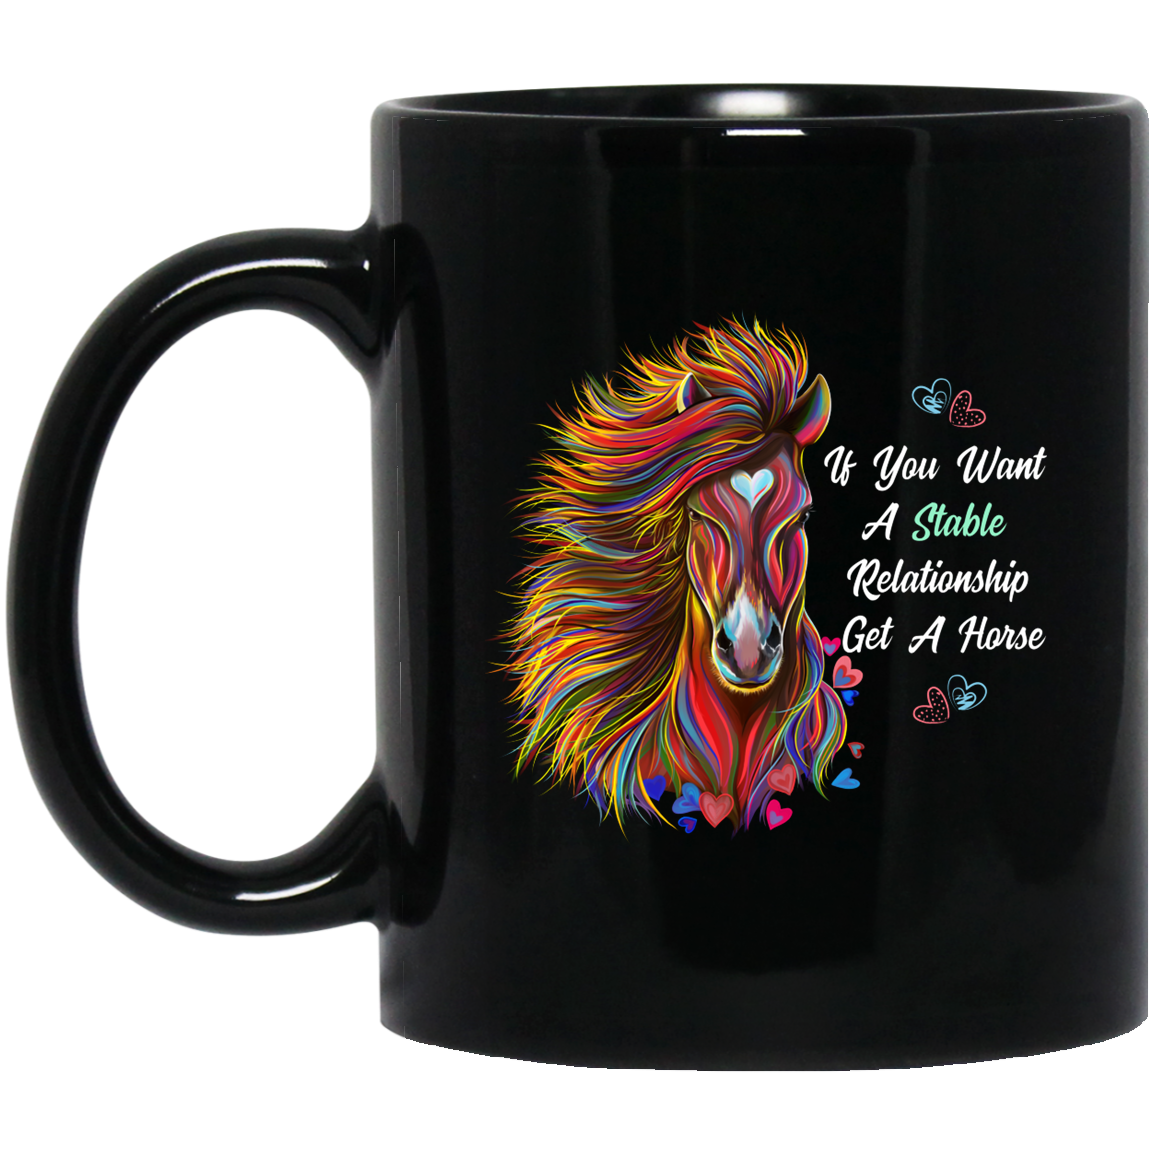 Horse Mug, Horse Gift, If You Want A Stable Relationship Get A Horse - GoneBold.gift